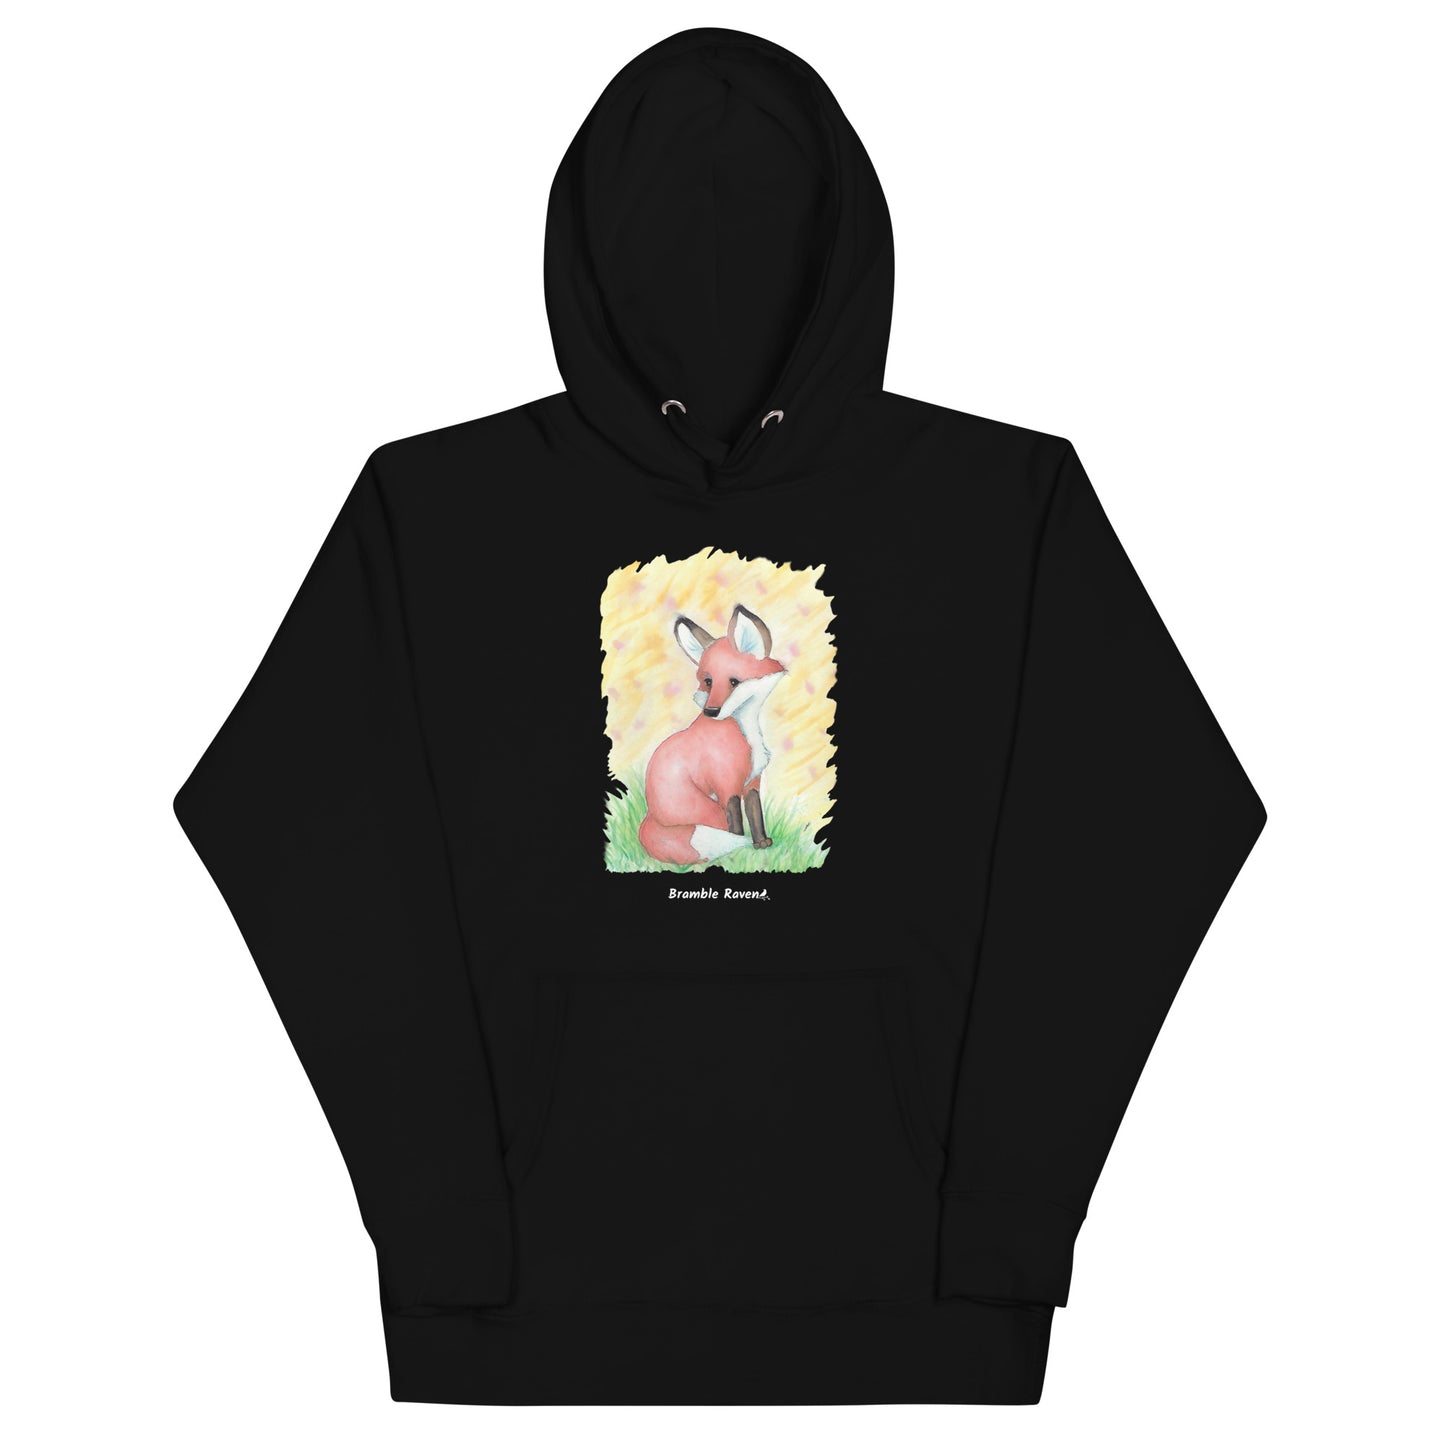 Unisex black colored hoodie. Features original watercolor painting of a fox in the grass against a yellow backdrop.